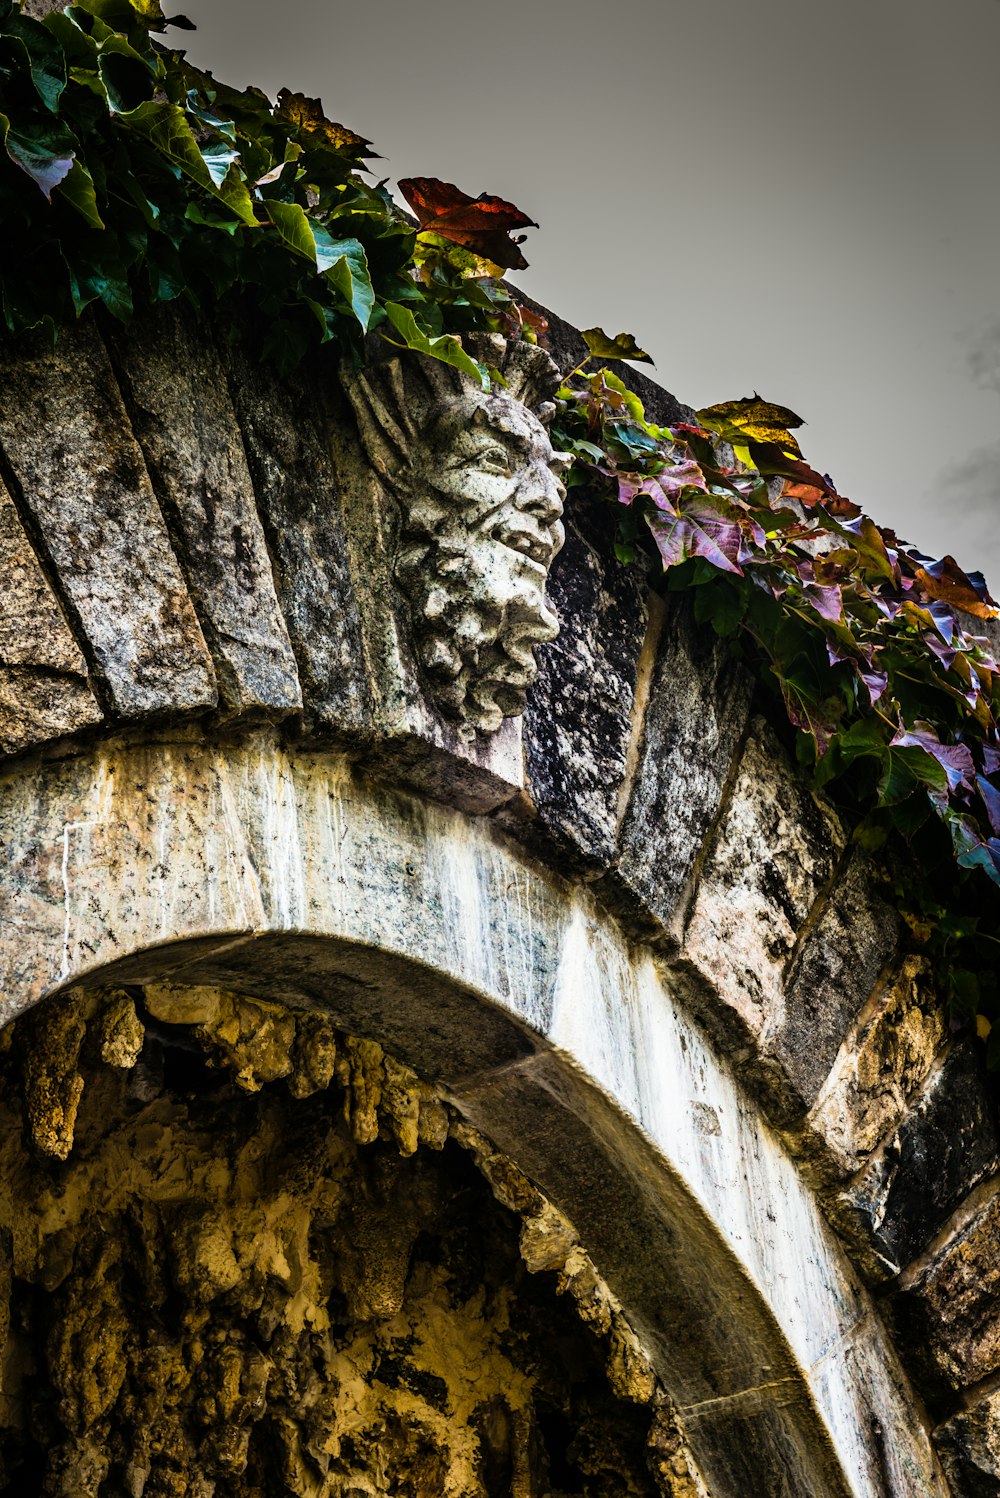 a stone arch with ivy growing on it